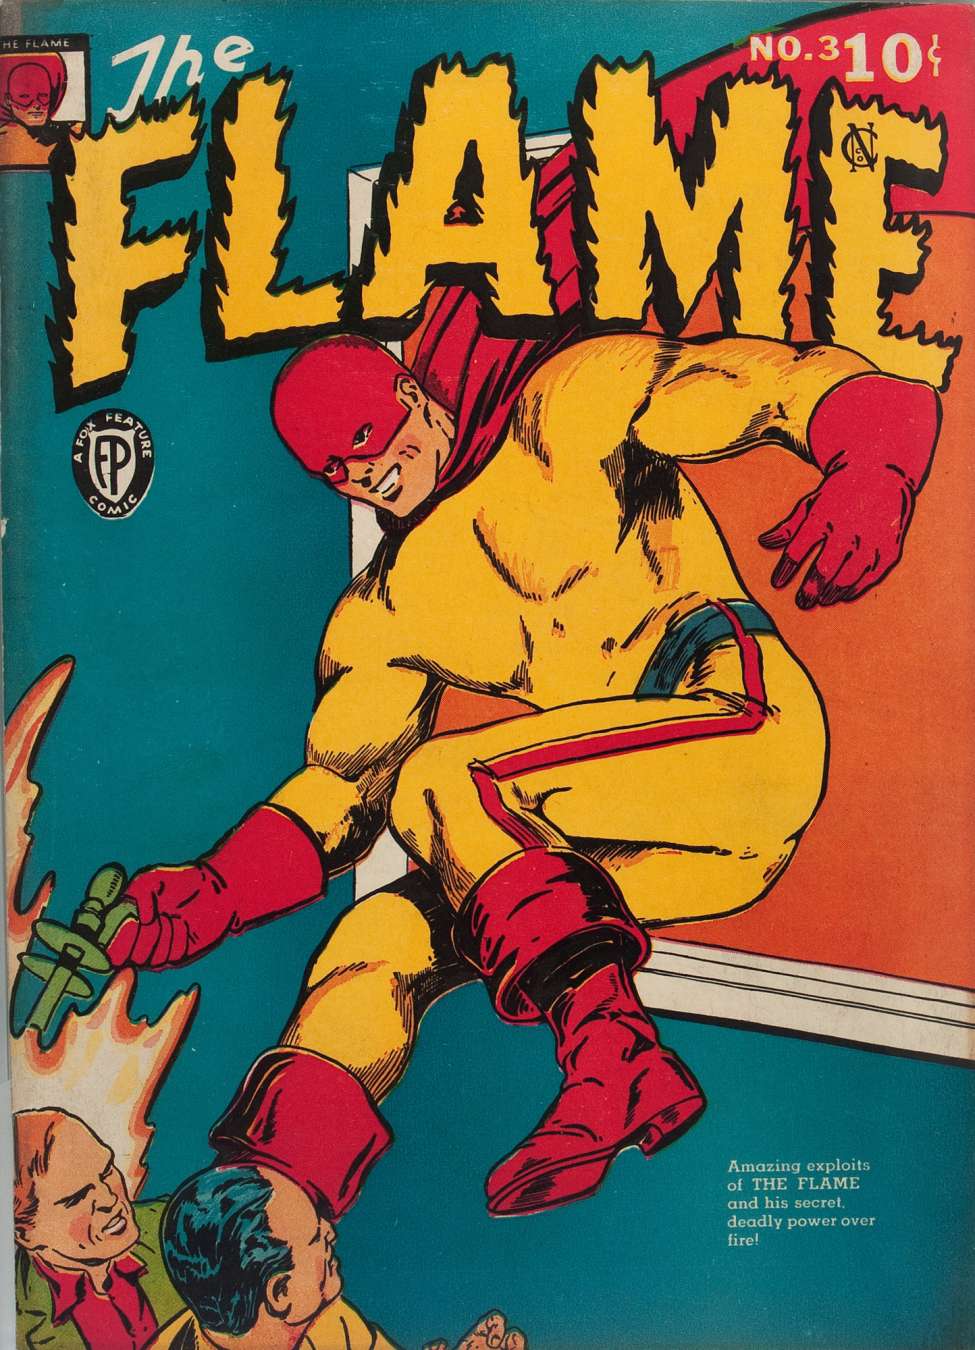 Book Cover For The Flame 3 (alt) - Version 2